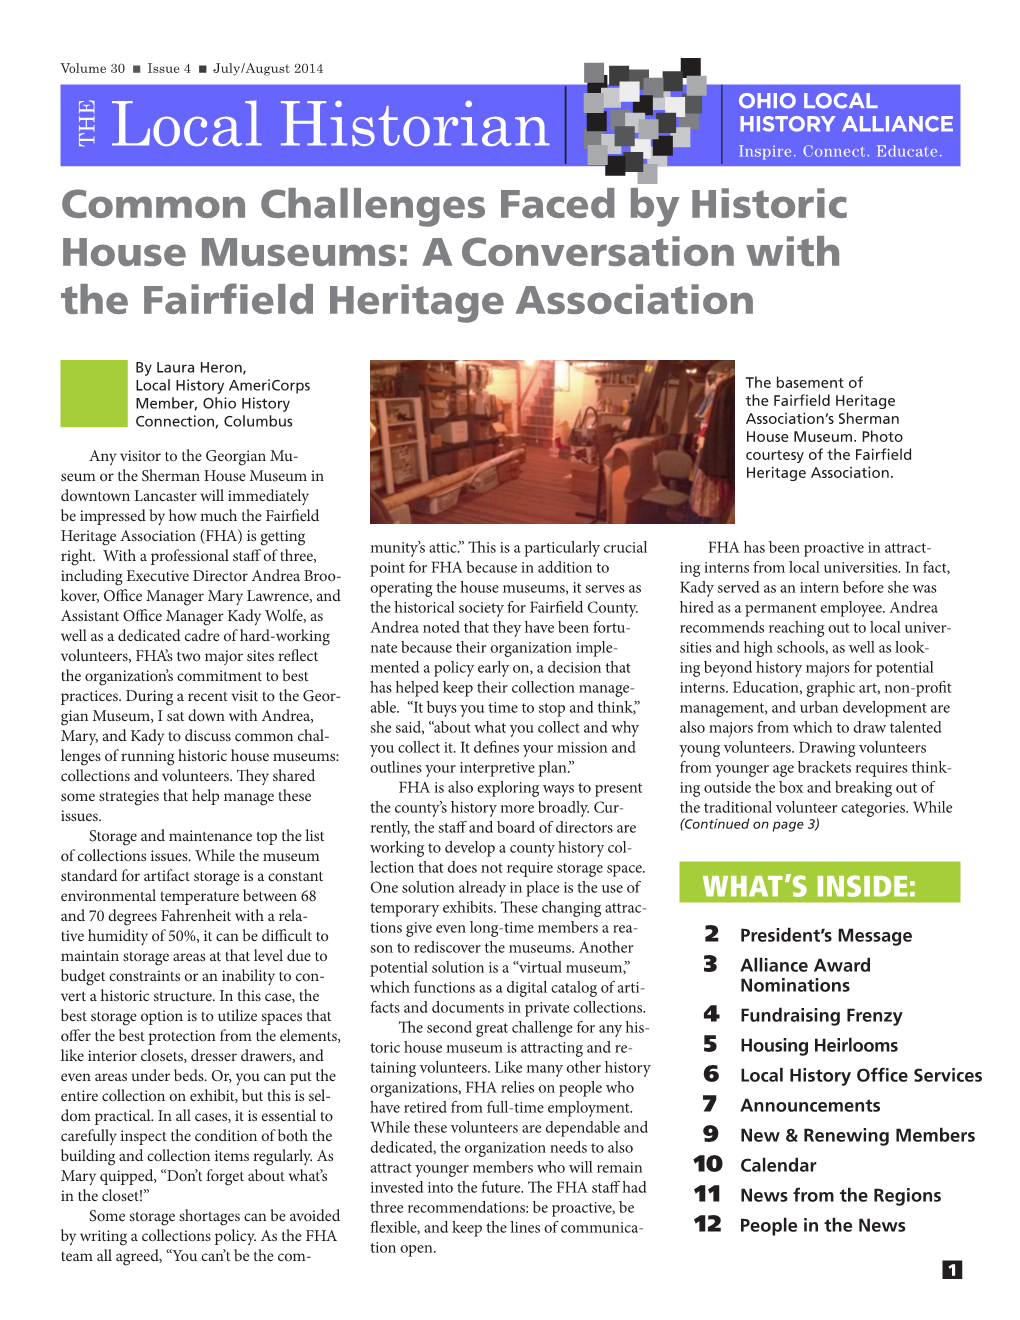 Local Historian Common Challenges Faced by Historic House Museums: a Conversation with the Fairfield Heritage Association